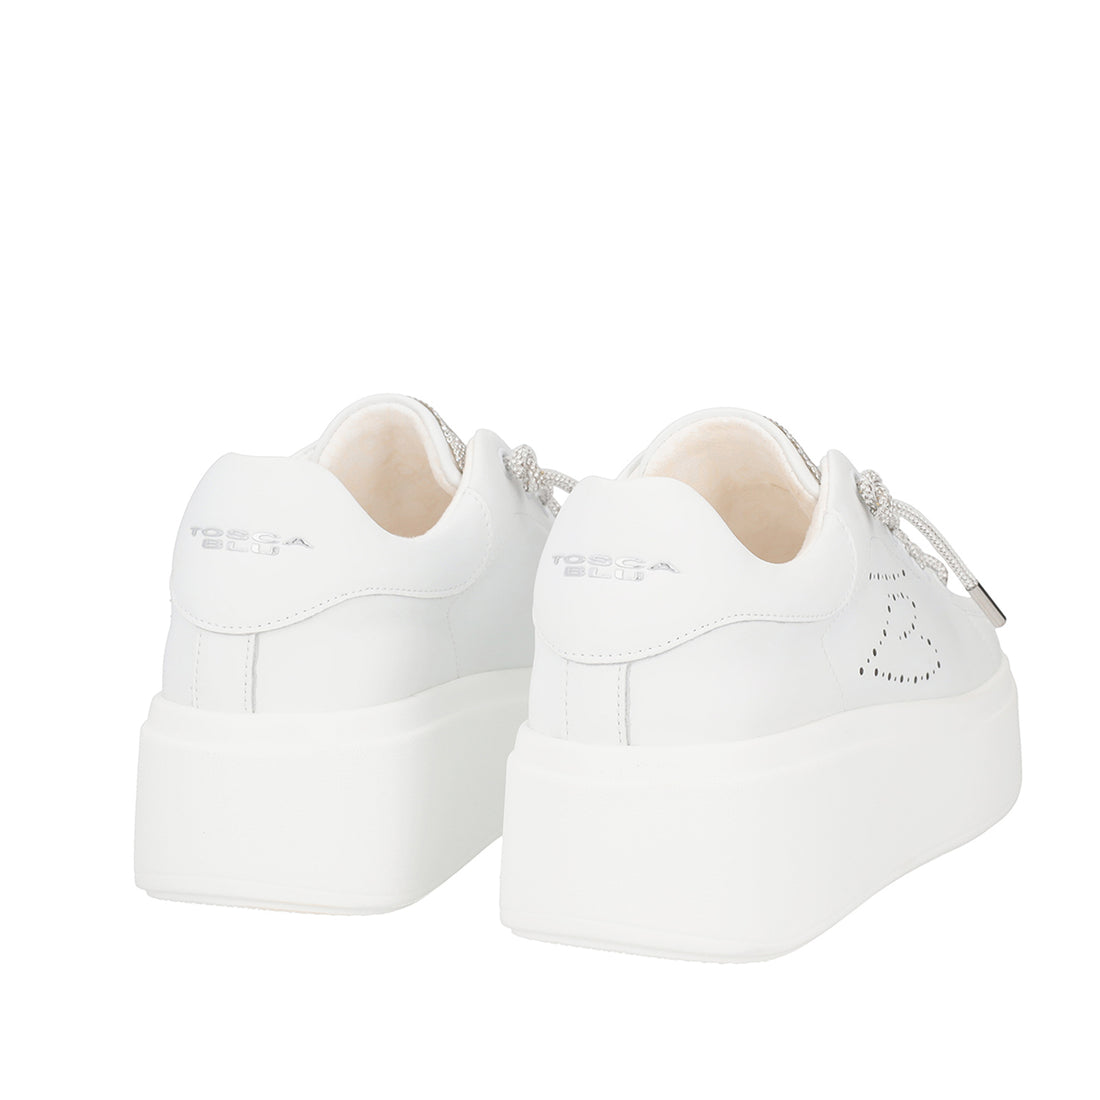 WHITE/SILVER VANITY SNEAKER IN LEATHER WITH MICRO RHINESTONES